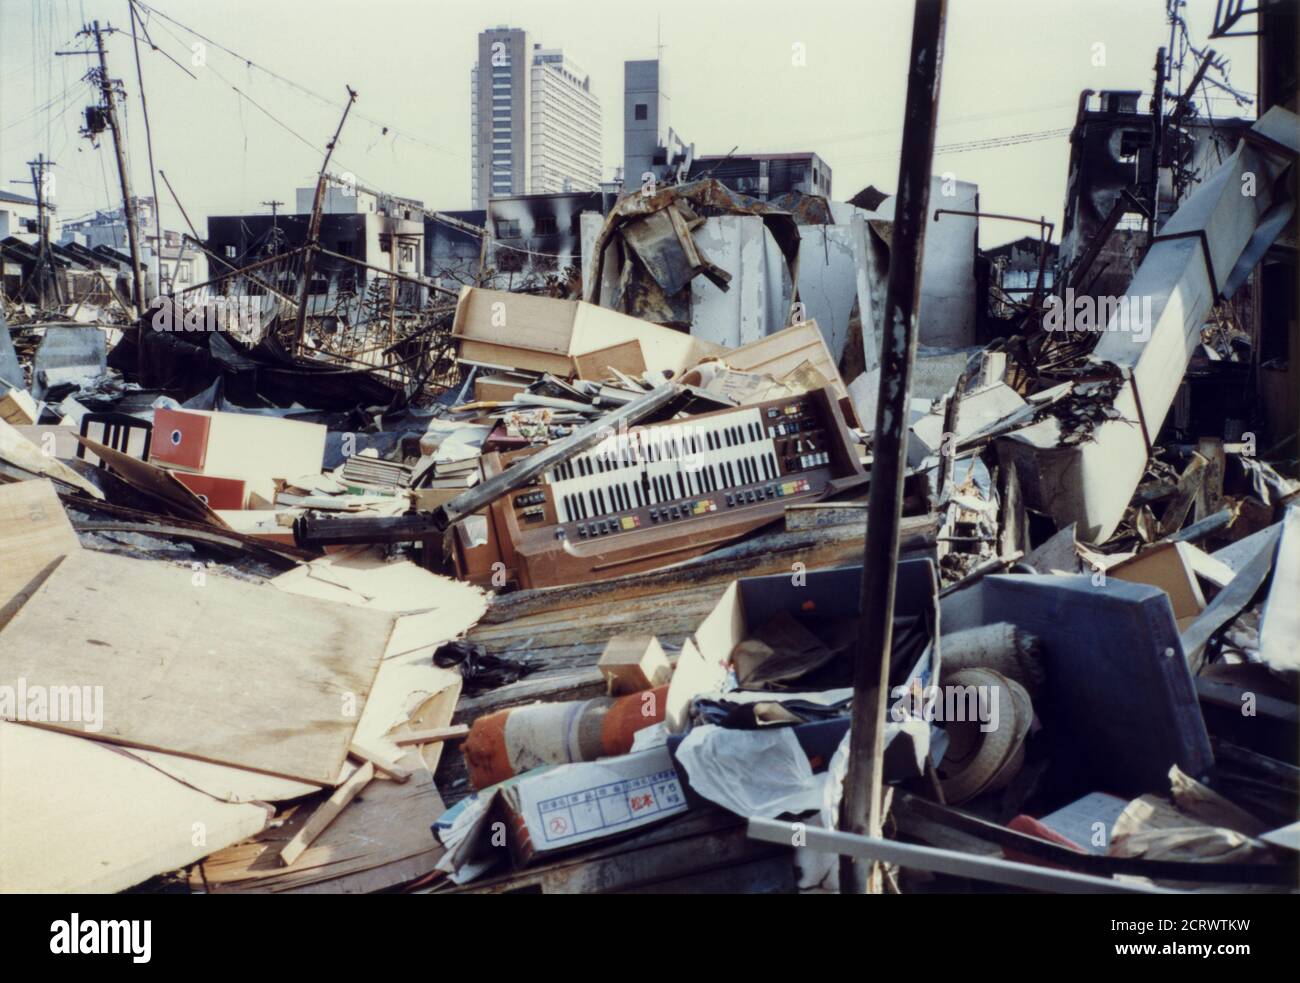 Wreckage and ruins in the aftermath of the damage caused by the 1995 Great Hanshin Earthquake in Kobe, Japan Stock Photo